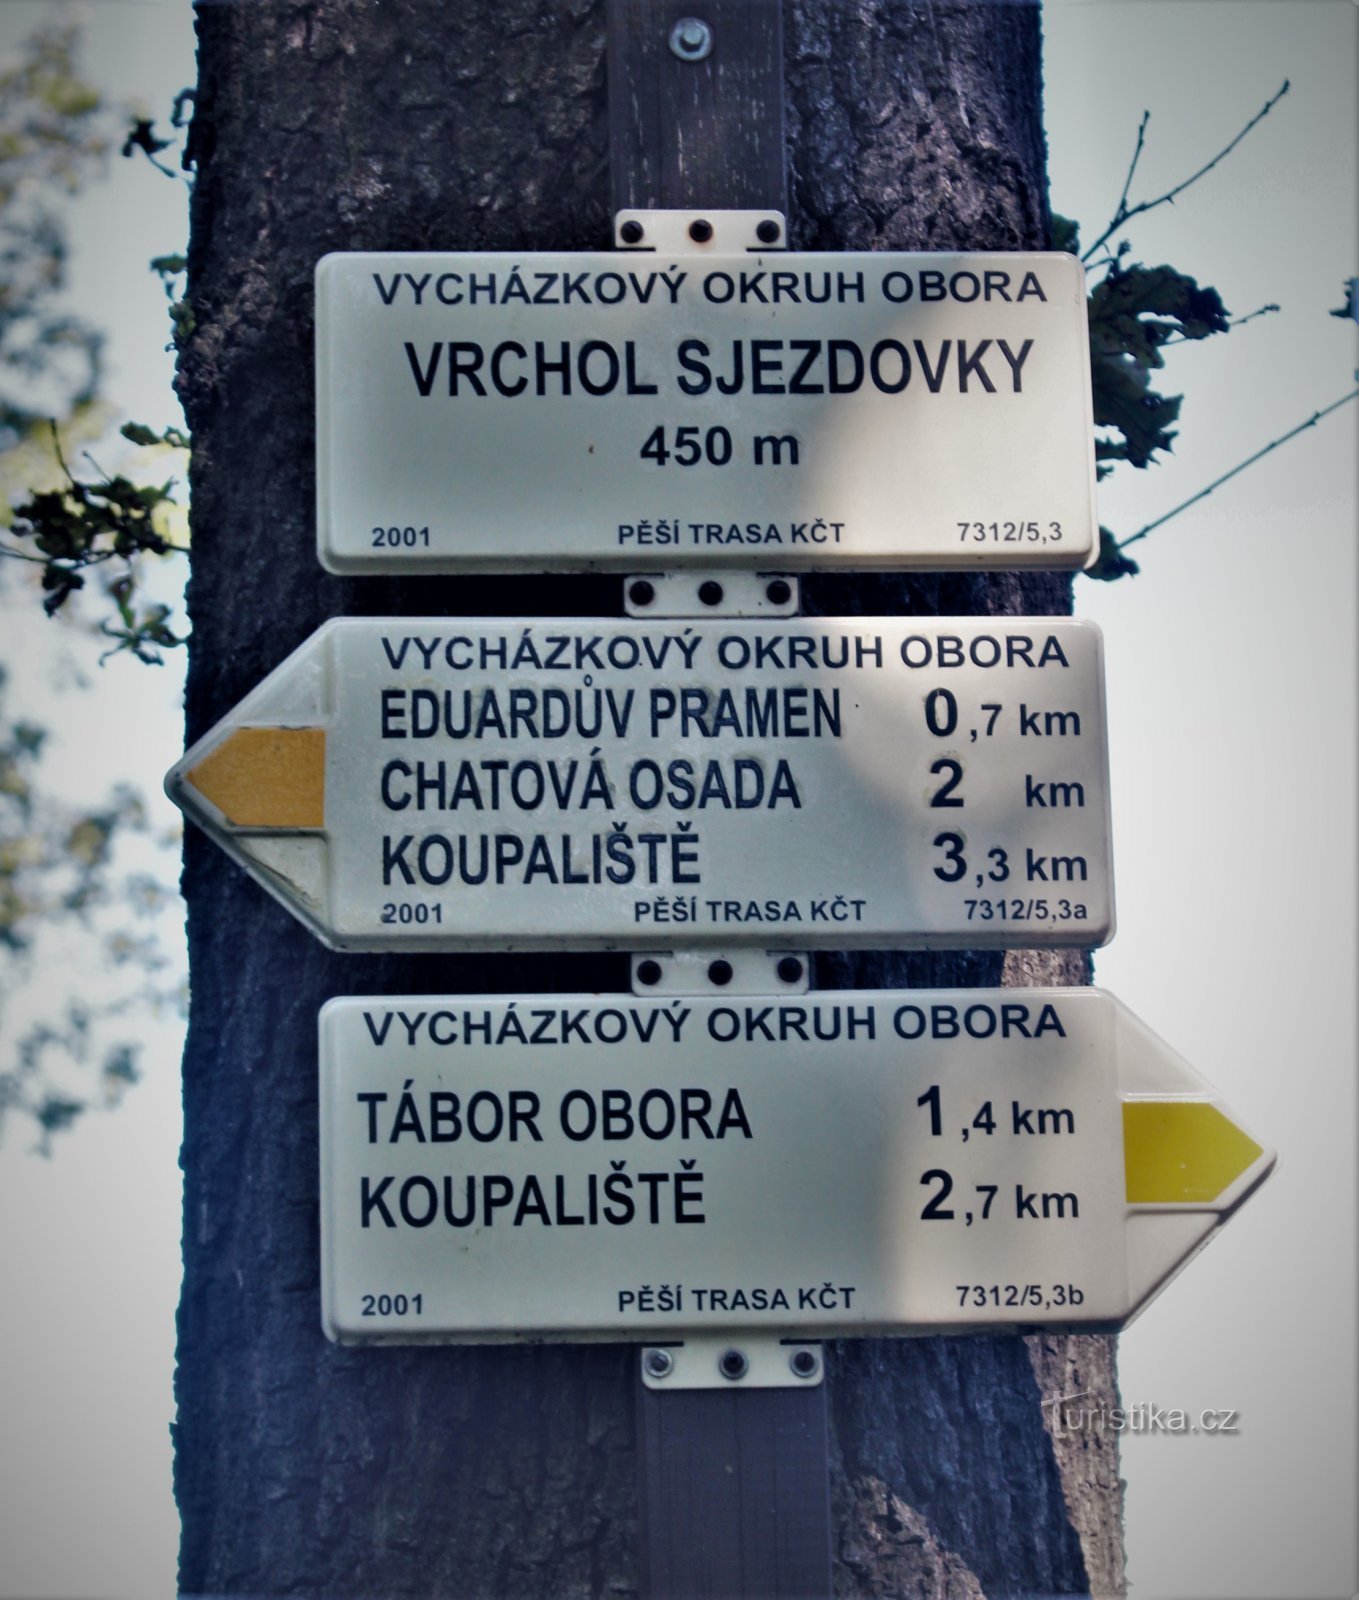 Tourist crossroads Top of the slope - Hláska lookout tower